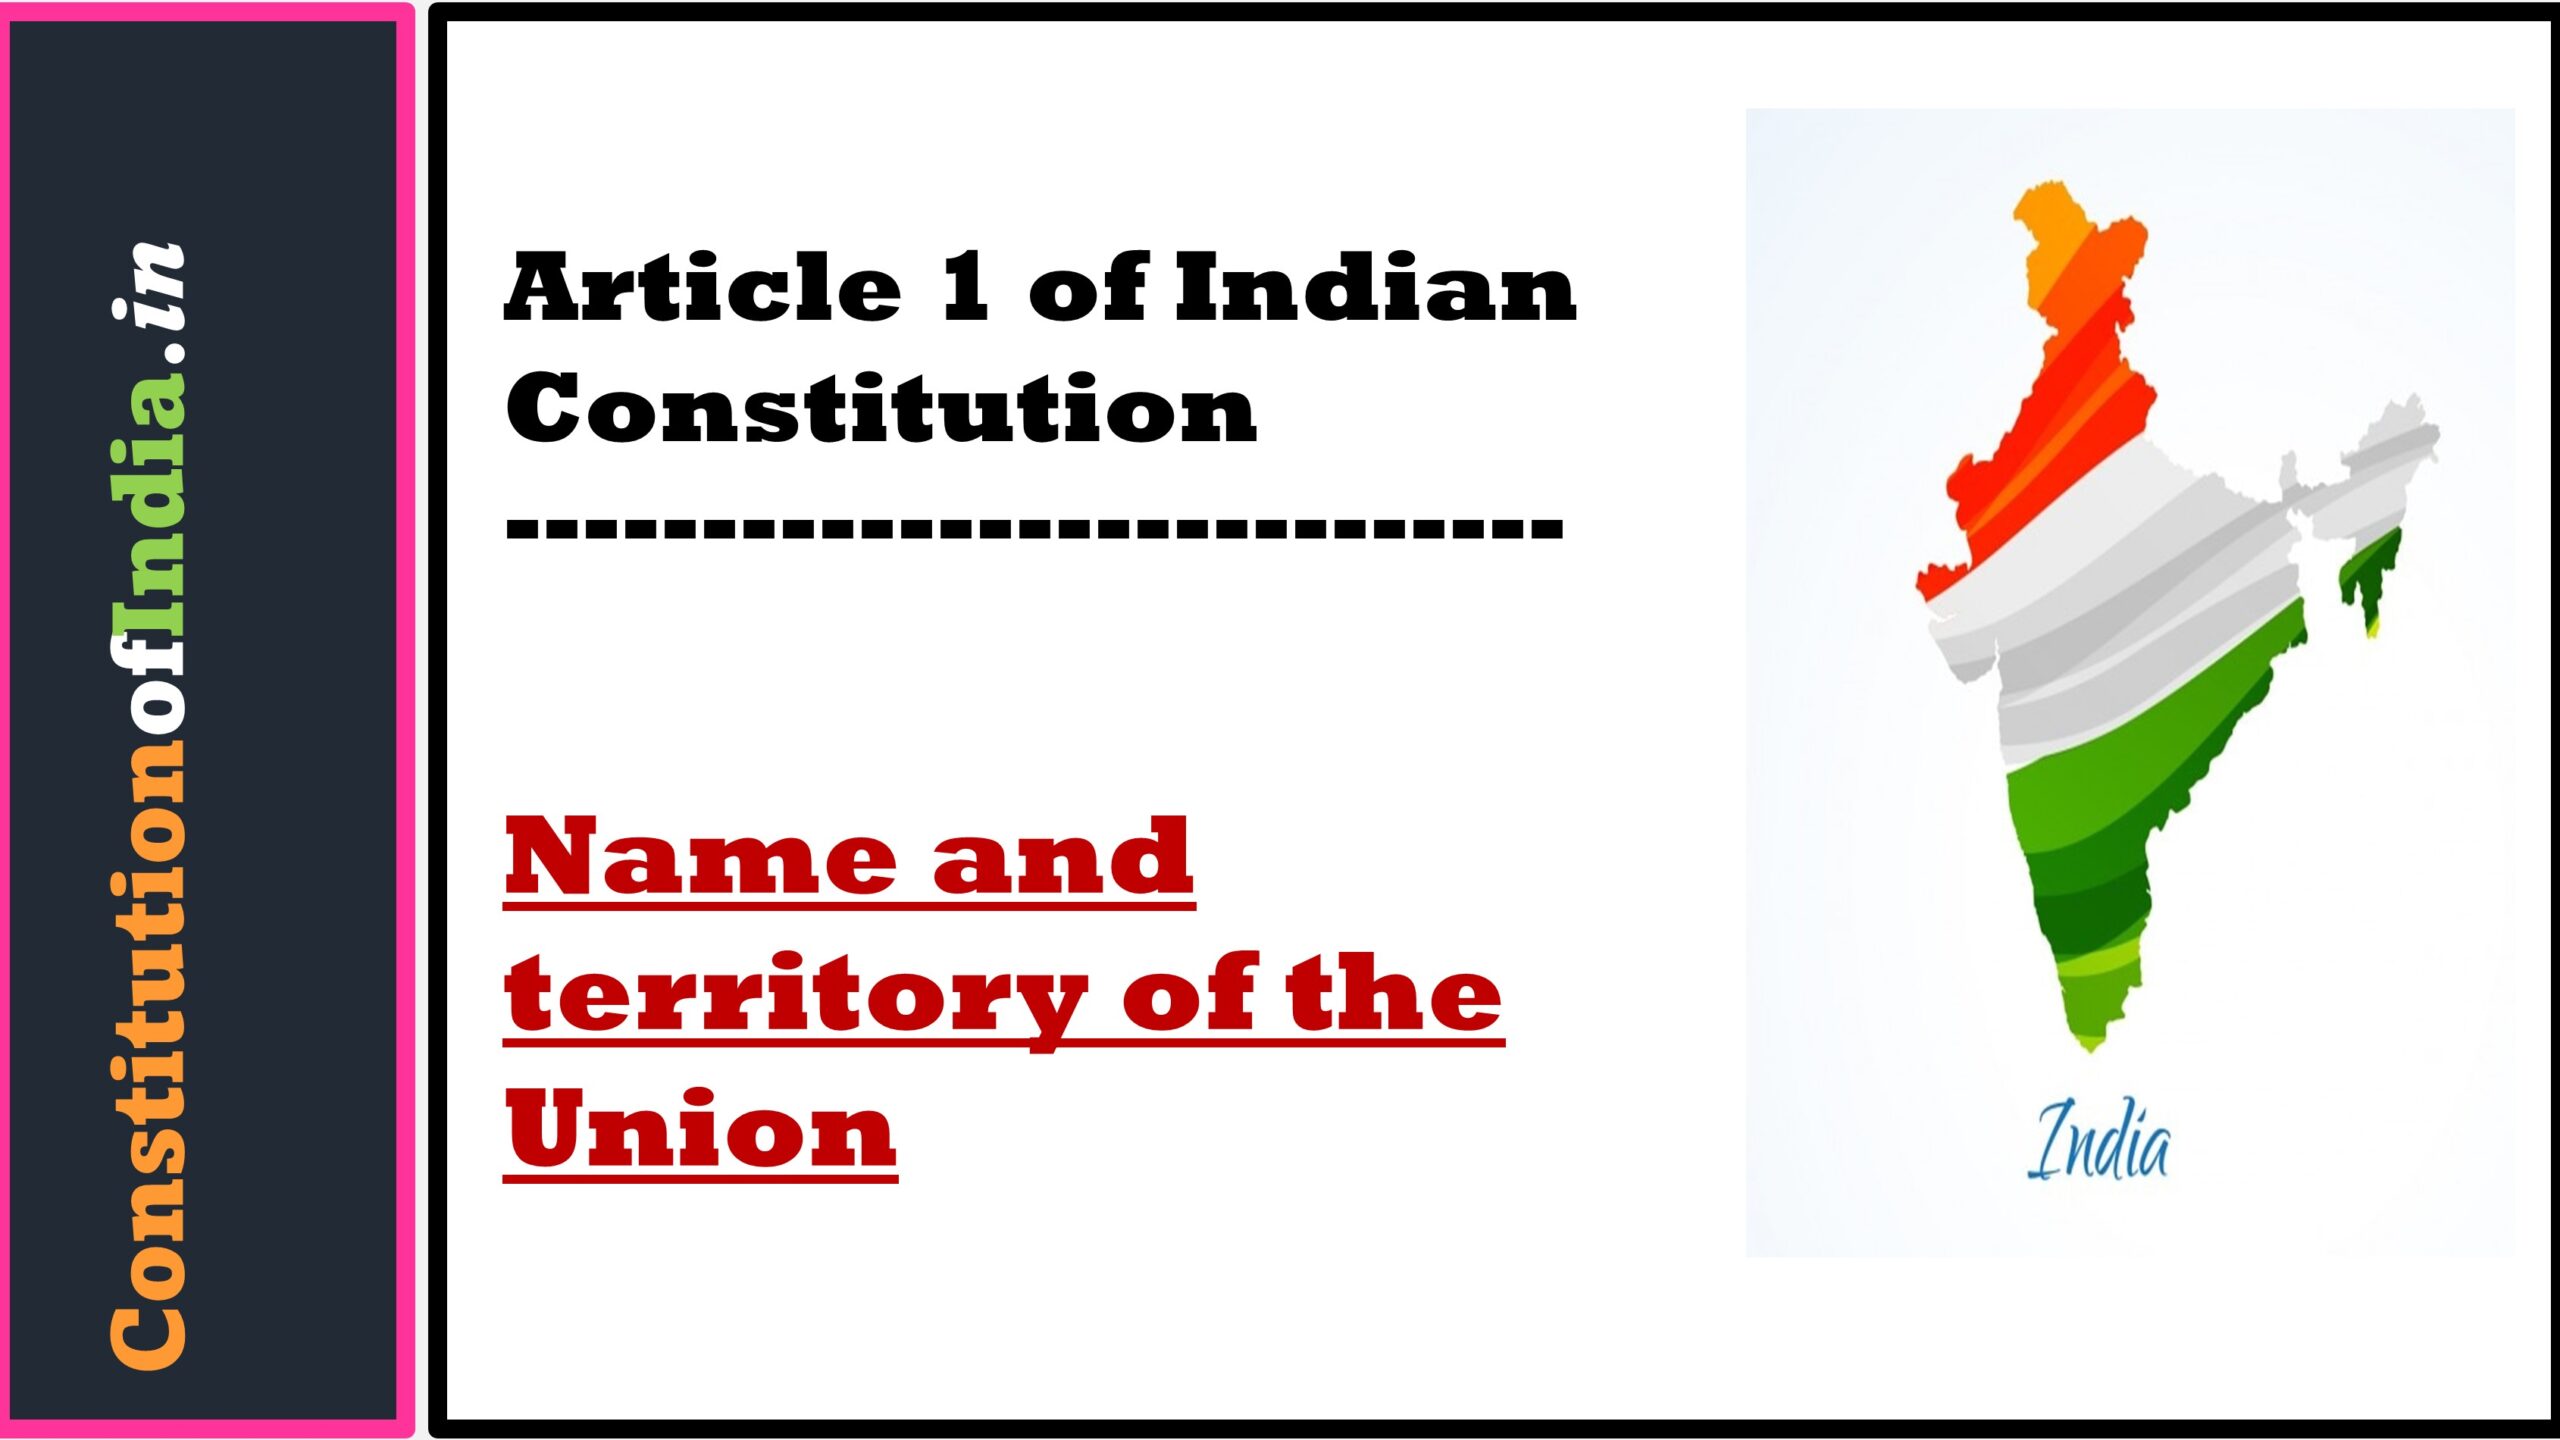 Article 1 of Indian Constitution